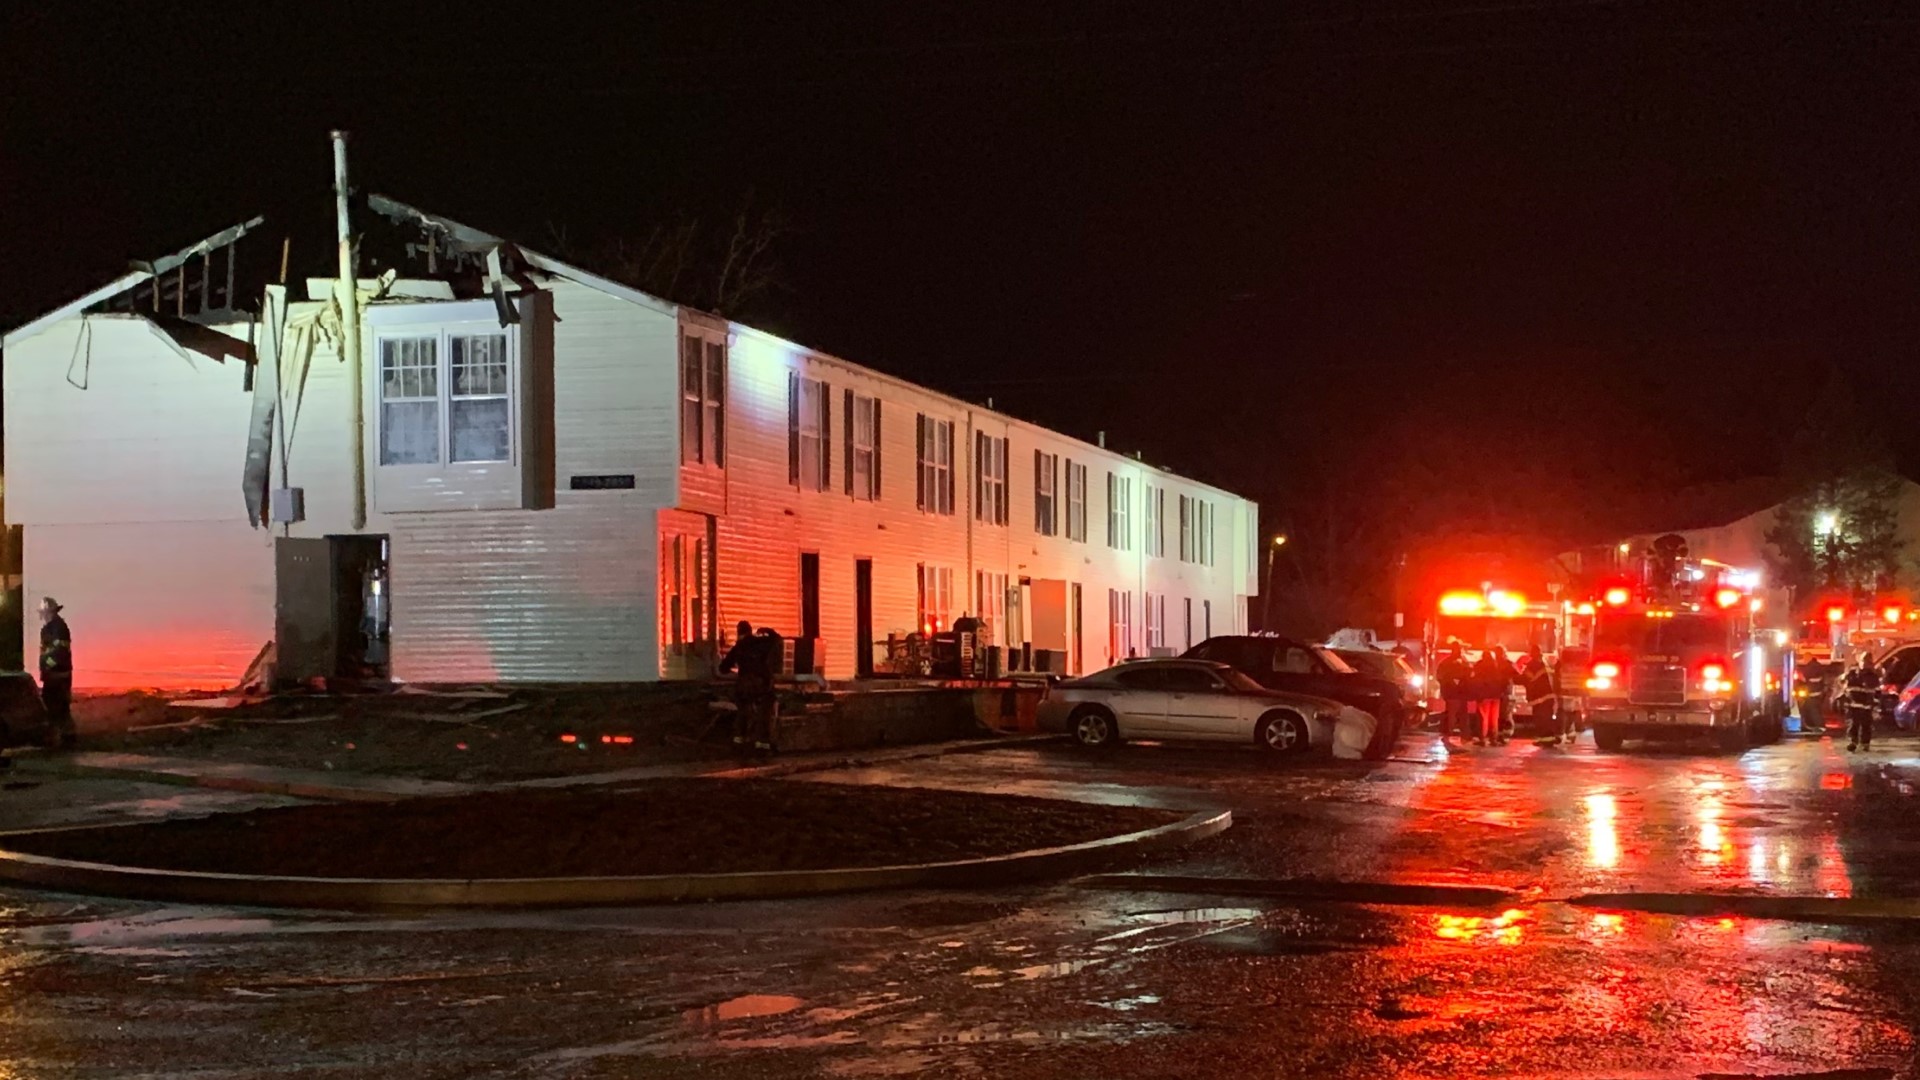 The fire happened at an apartment in the 2800 block of Clear Lake Way, between East Hanna and Carson avenues.